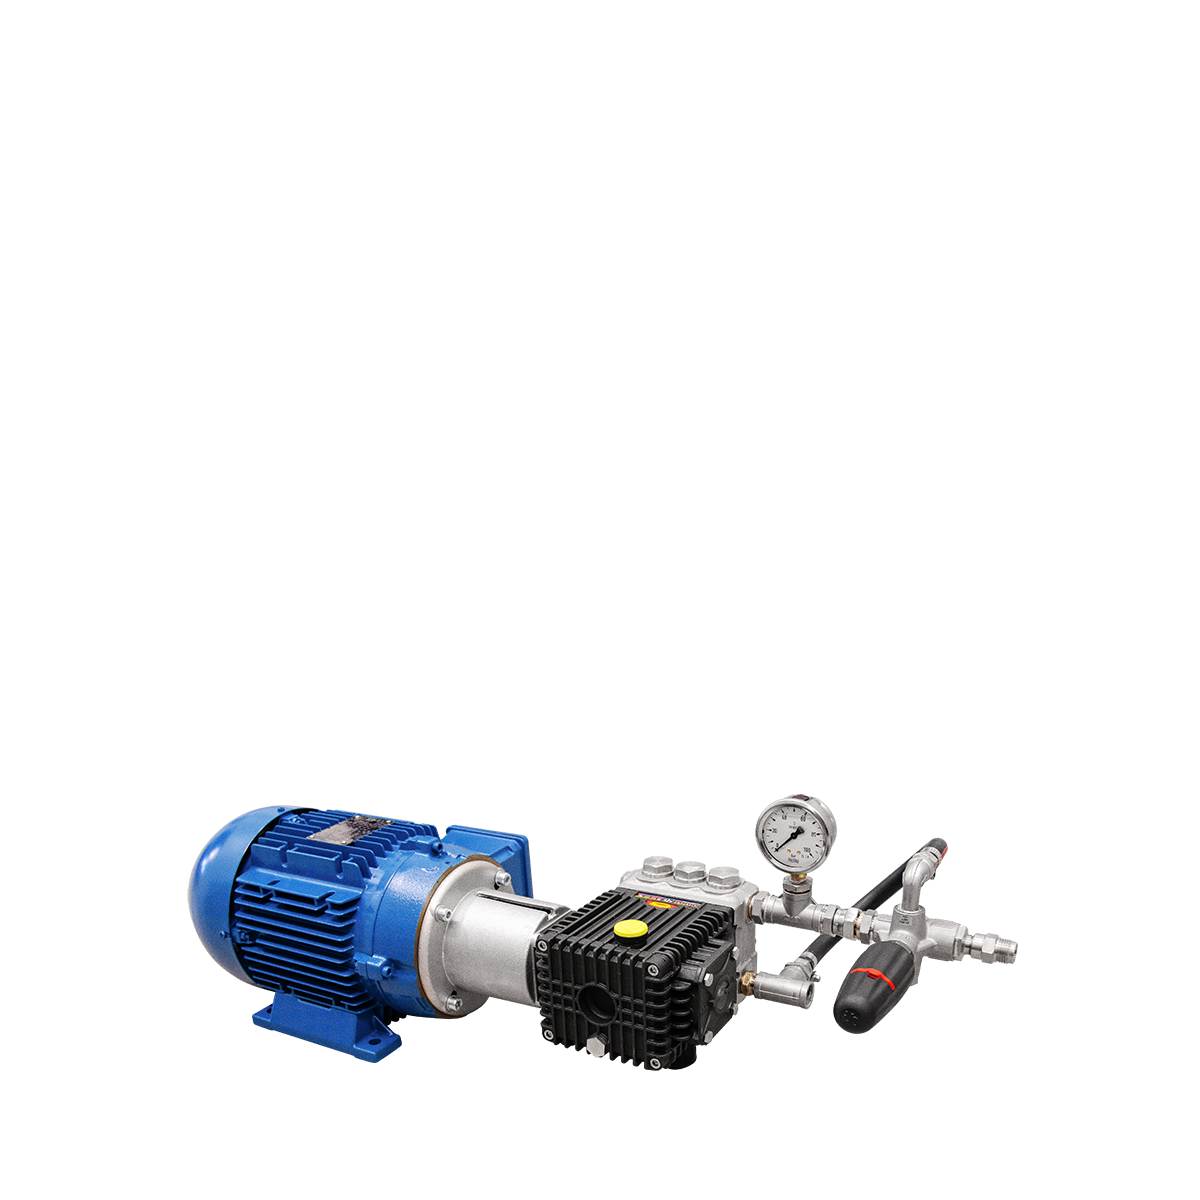 high pressure pump units stationary high pressure HP cleaners up to 85 degrees Celsius